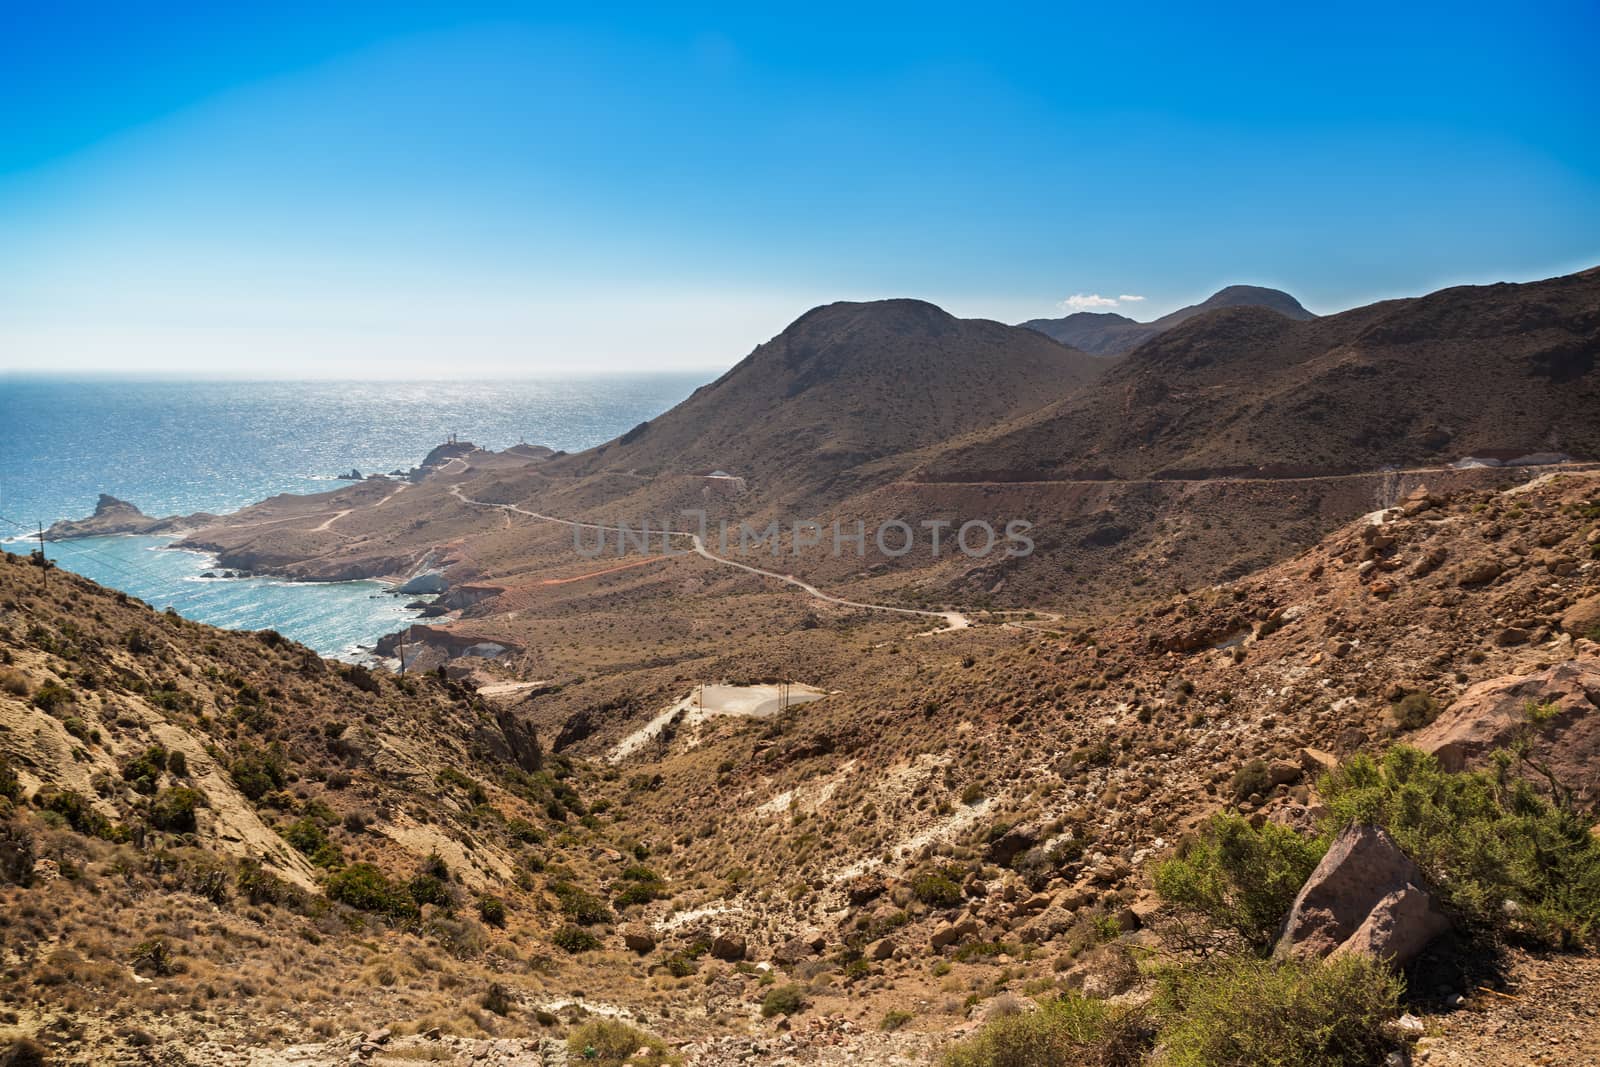 Cloudless skies at Cabo del Gato, Almeria, Spain by fisfra